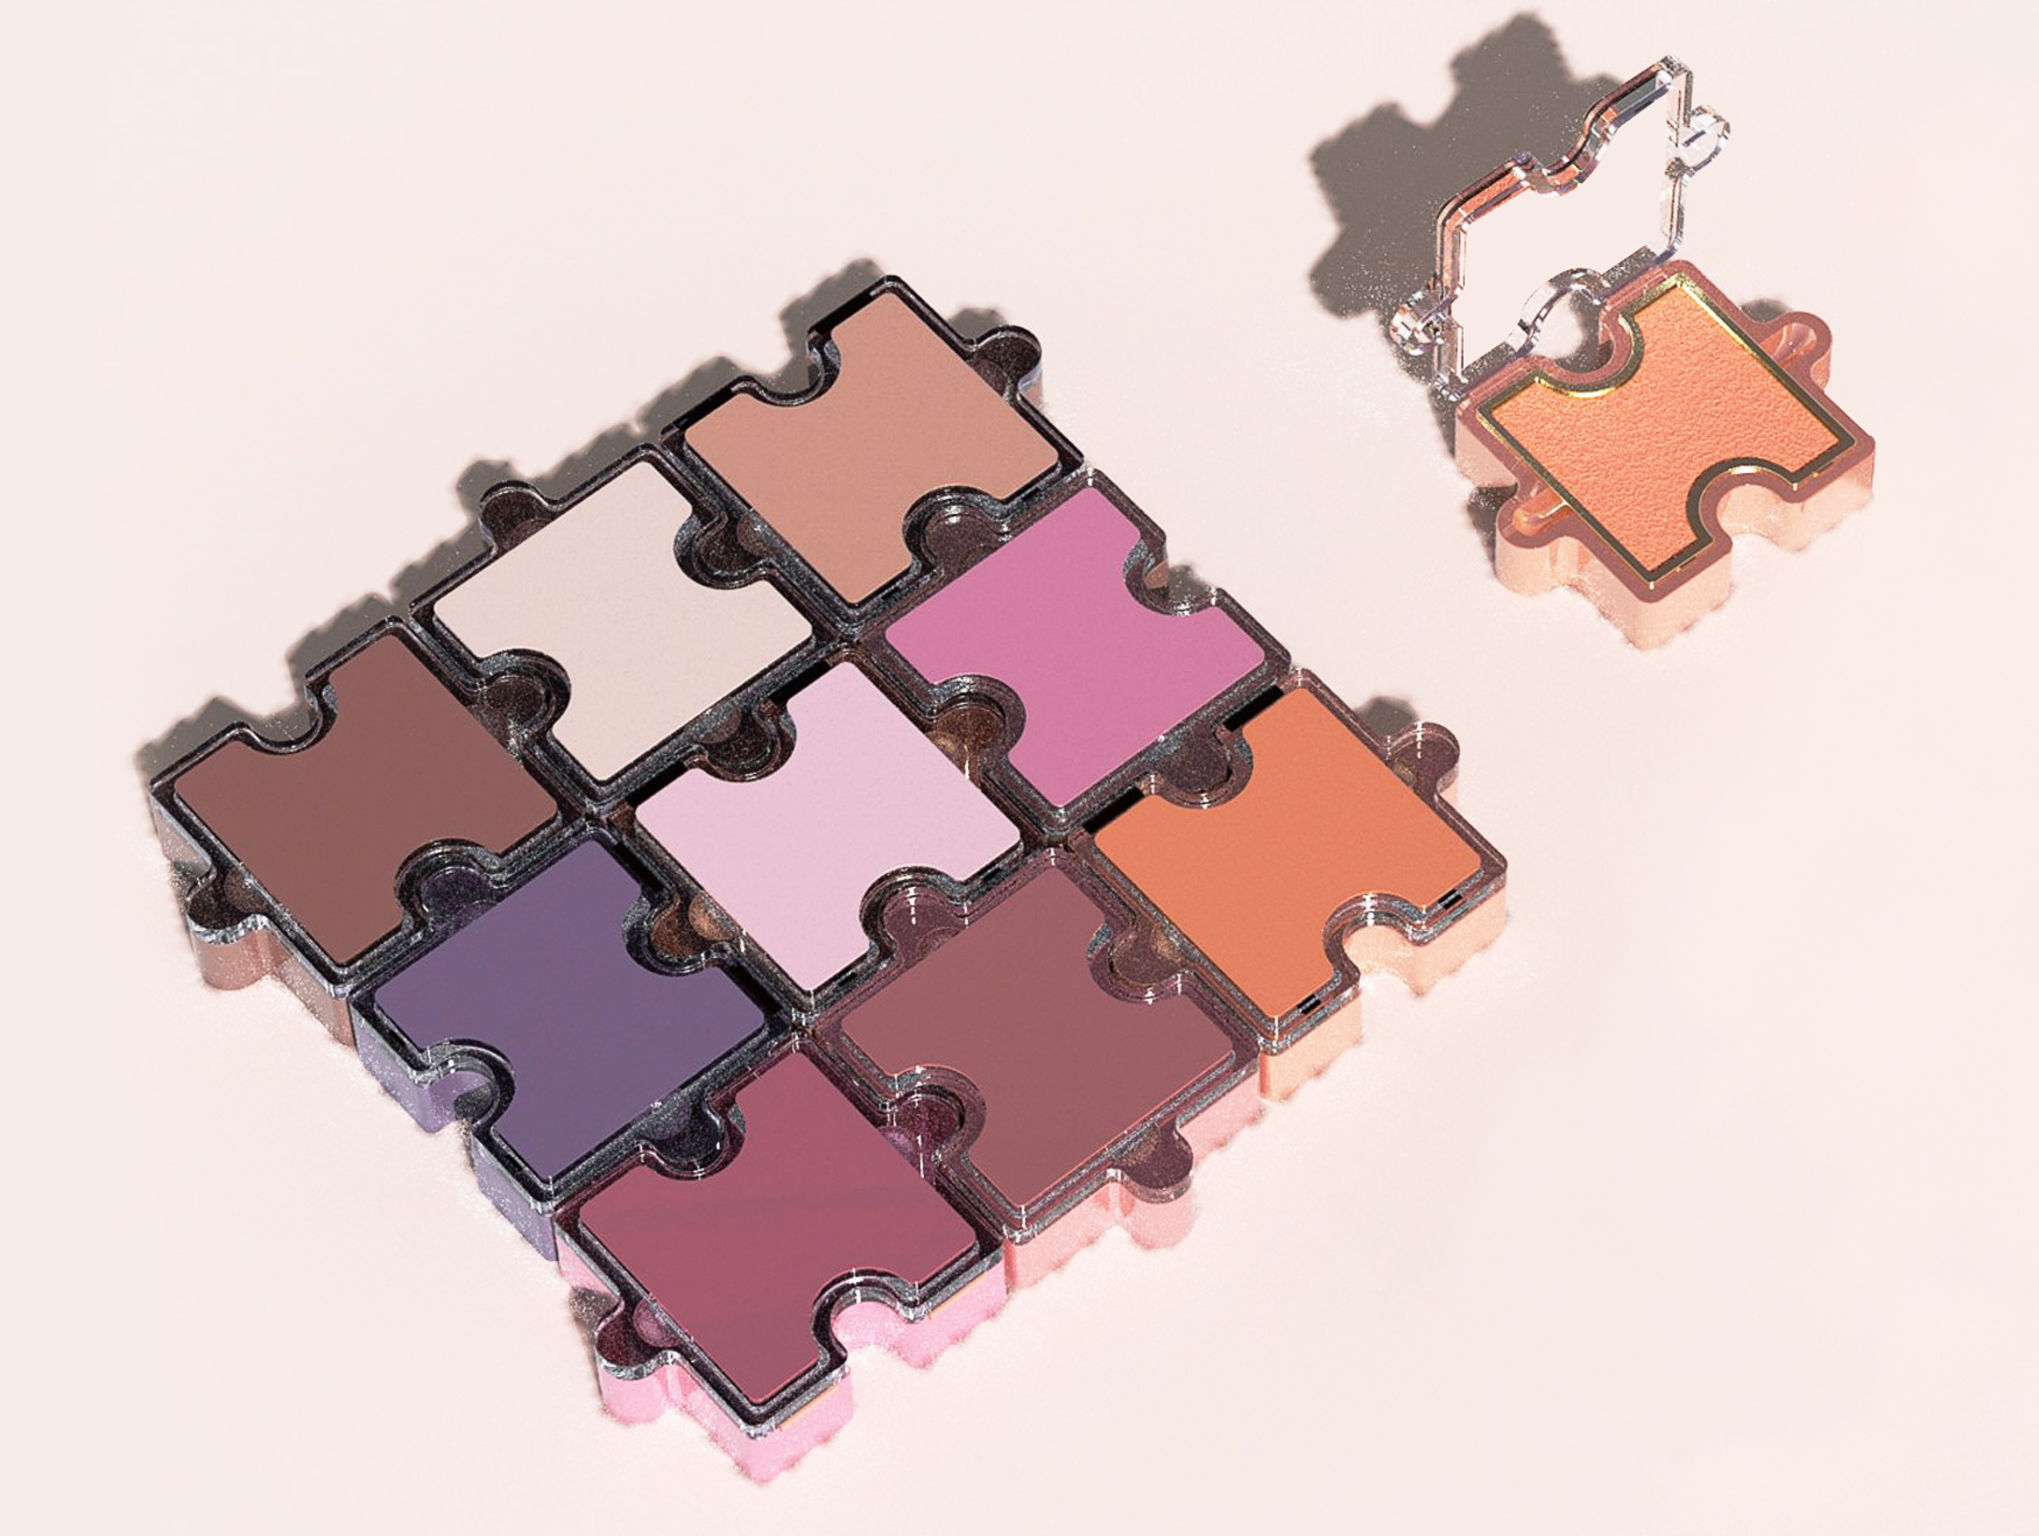 Puzzle - Play with beauty and joy Make-up compact